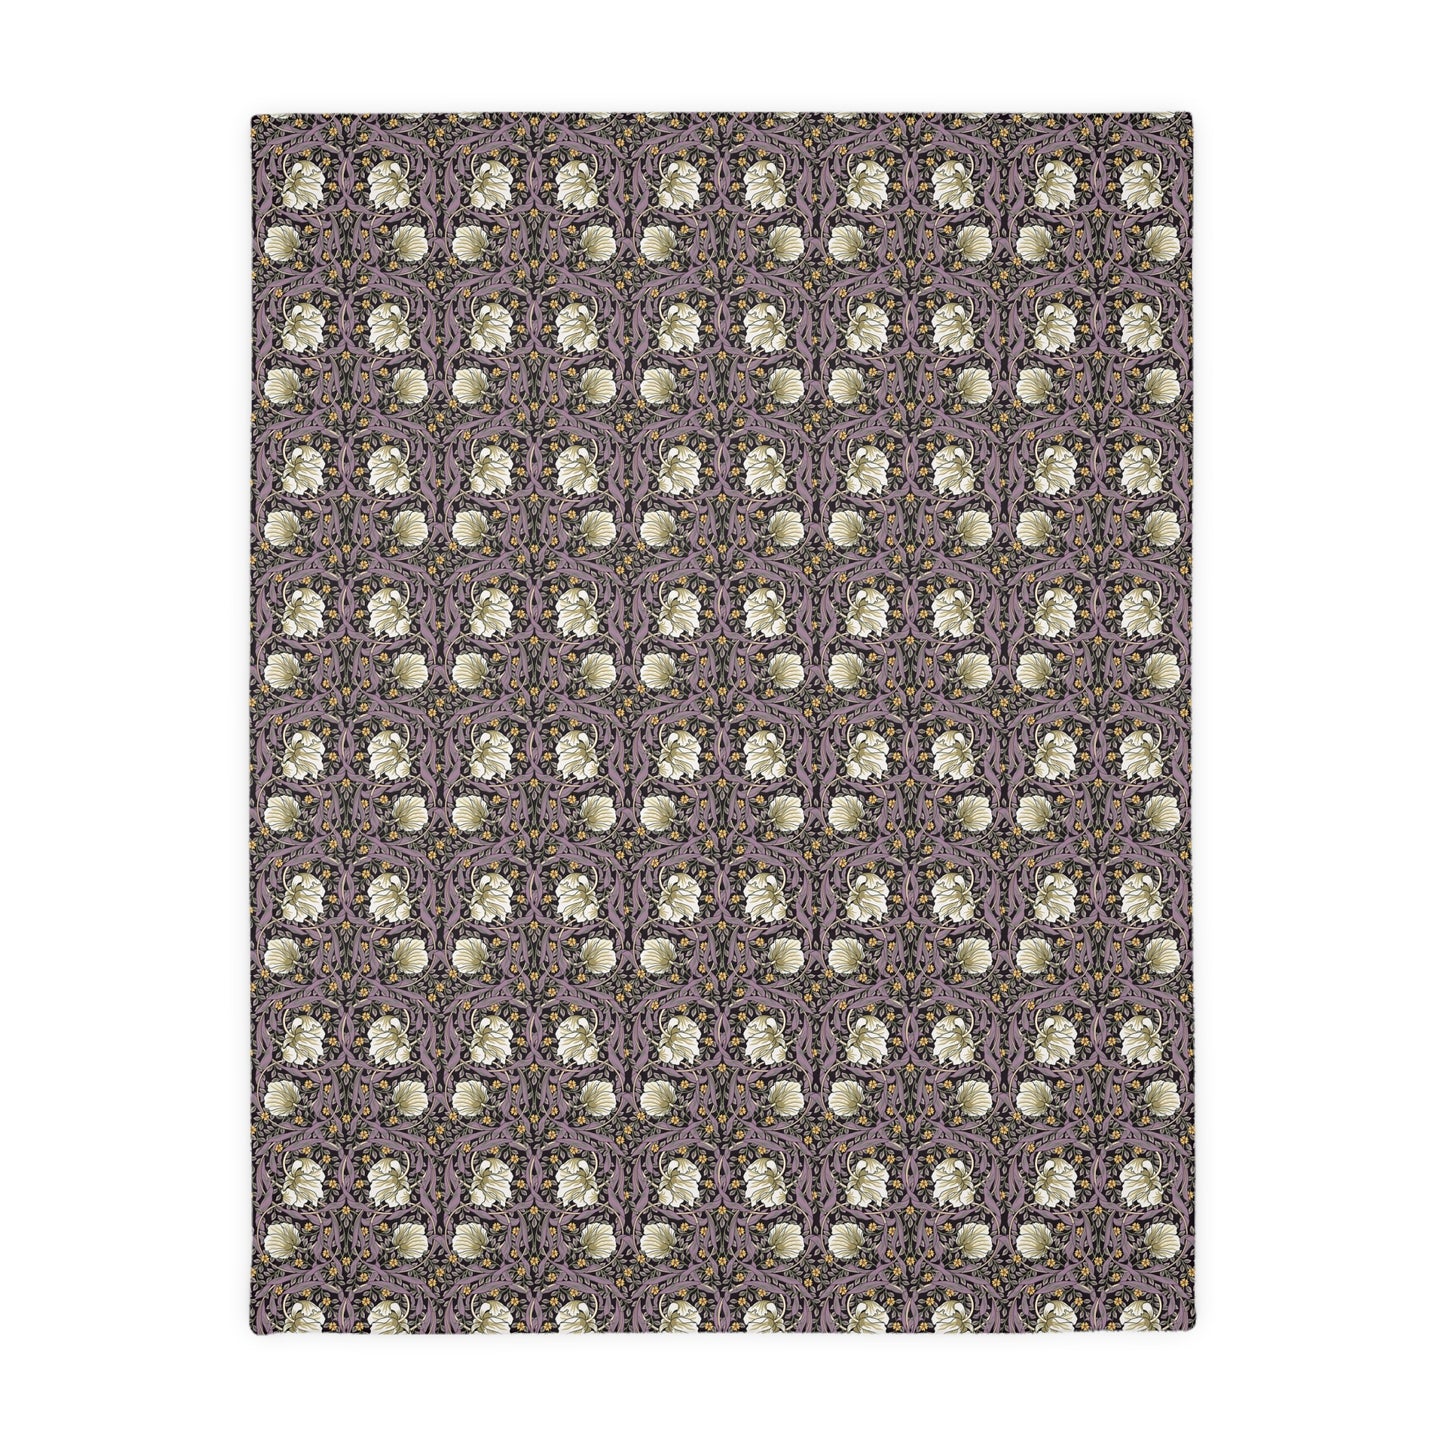 william-morris-co-luxury-velveteen-minky-blanket-two-sided-print-pimpernel-collection-rosewood-lavender-7